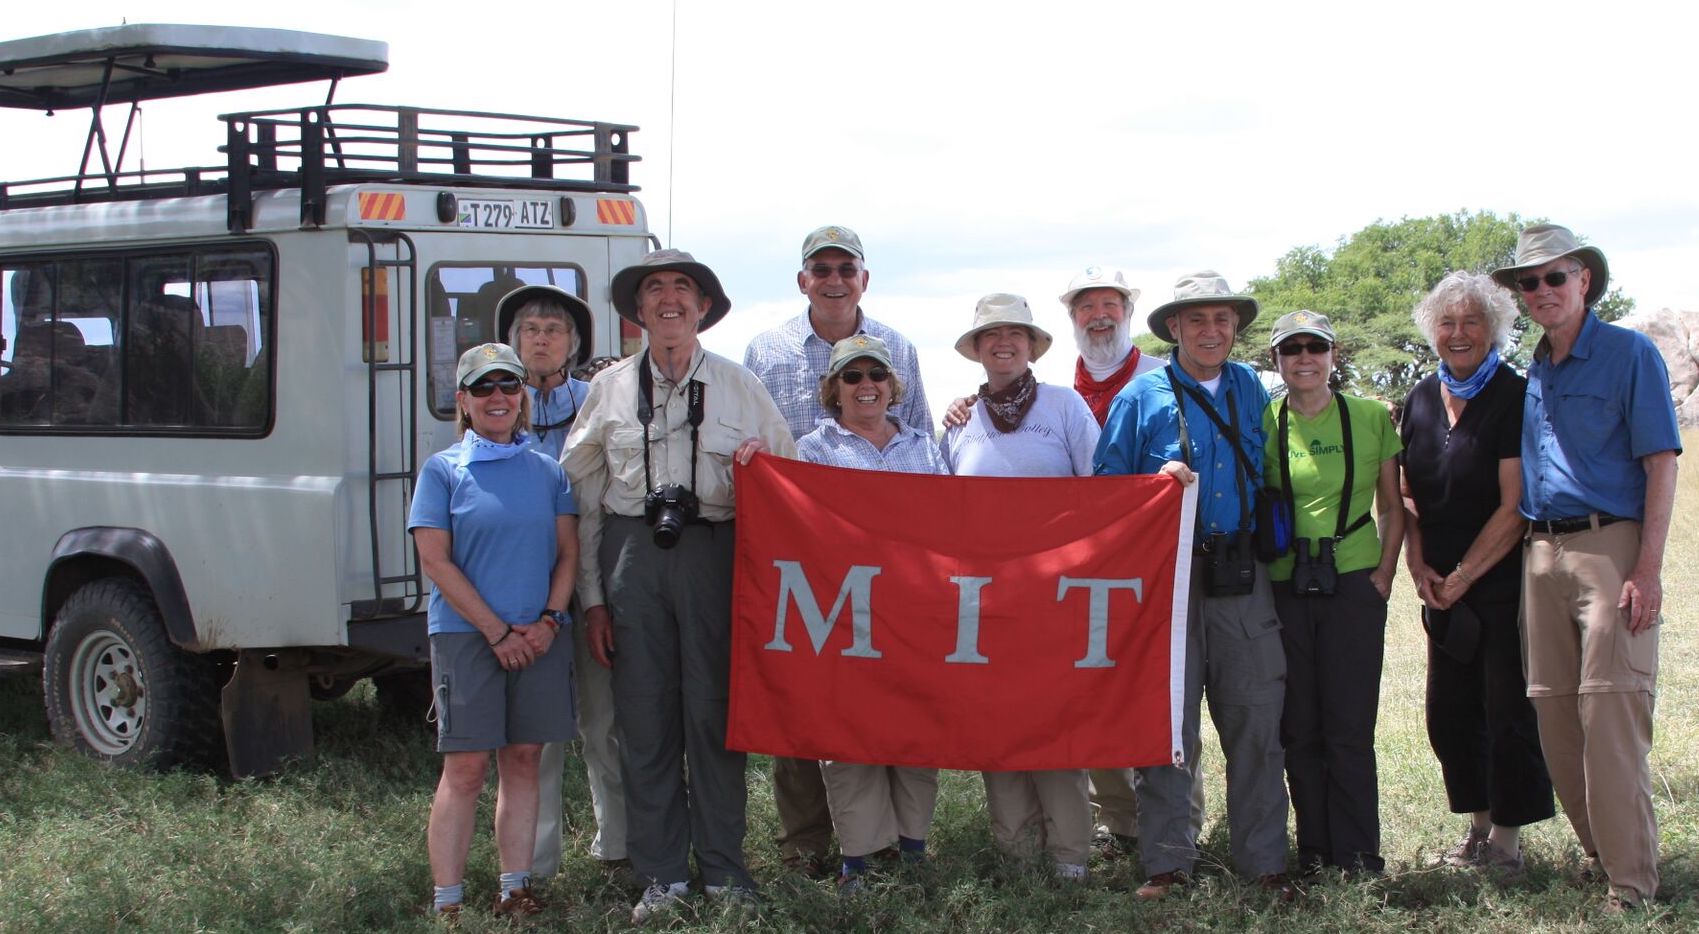 A group of 11 people wearing safari gear stand in front of a van and hold a red MIT banner.